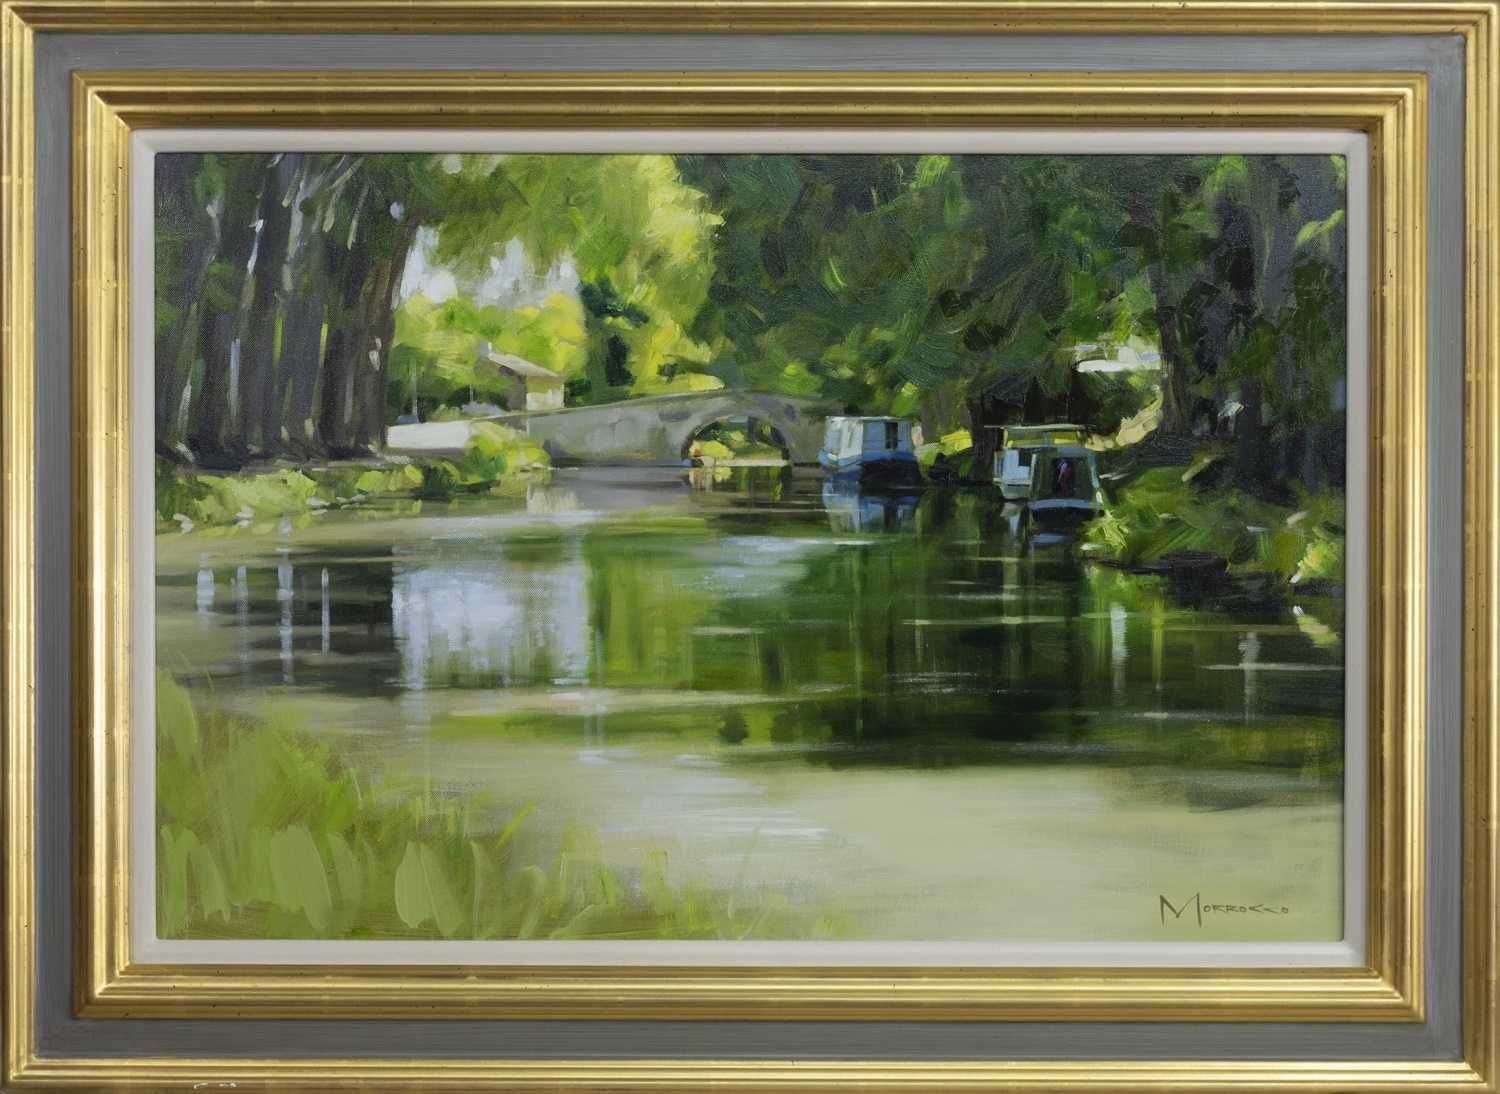 REFLECTIONS, CANAL DU MIDI, NEAR COLOMIERS, AN OIL BY JACK MORROCCO